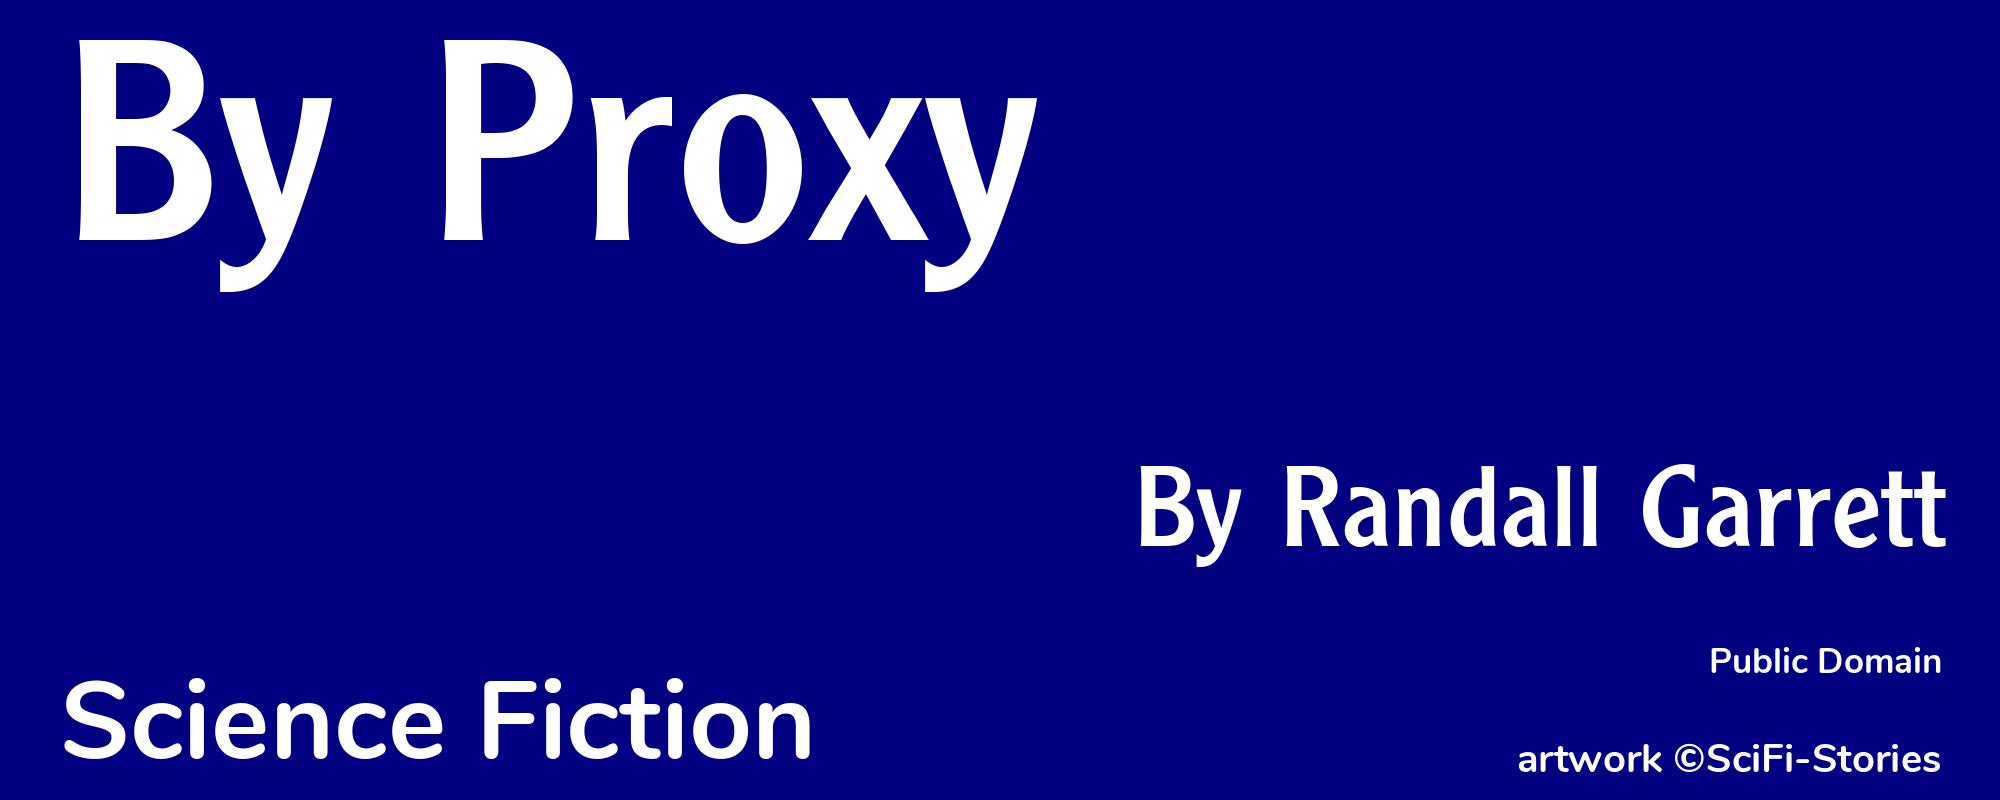 By Proxy - Cover